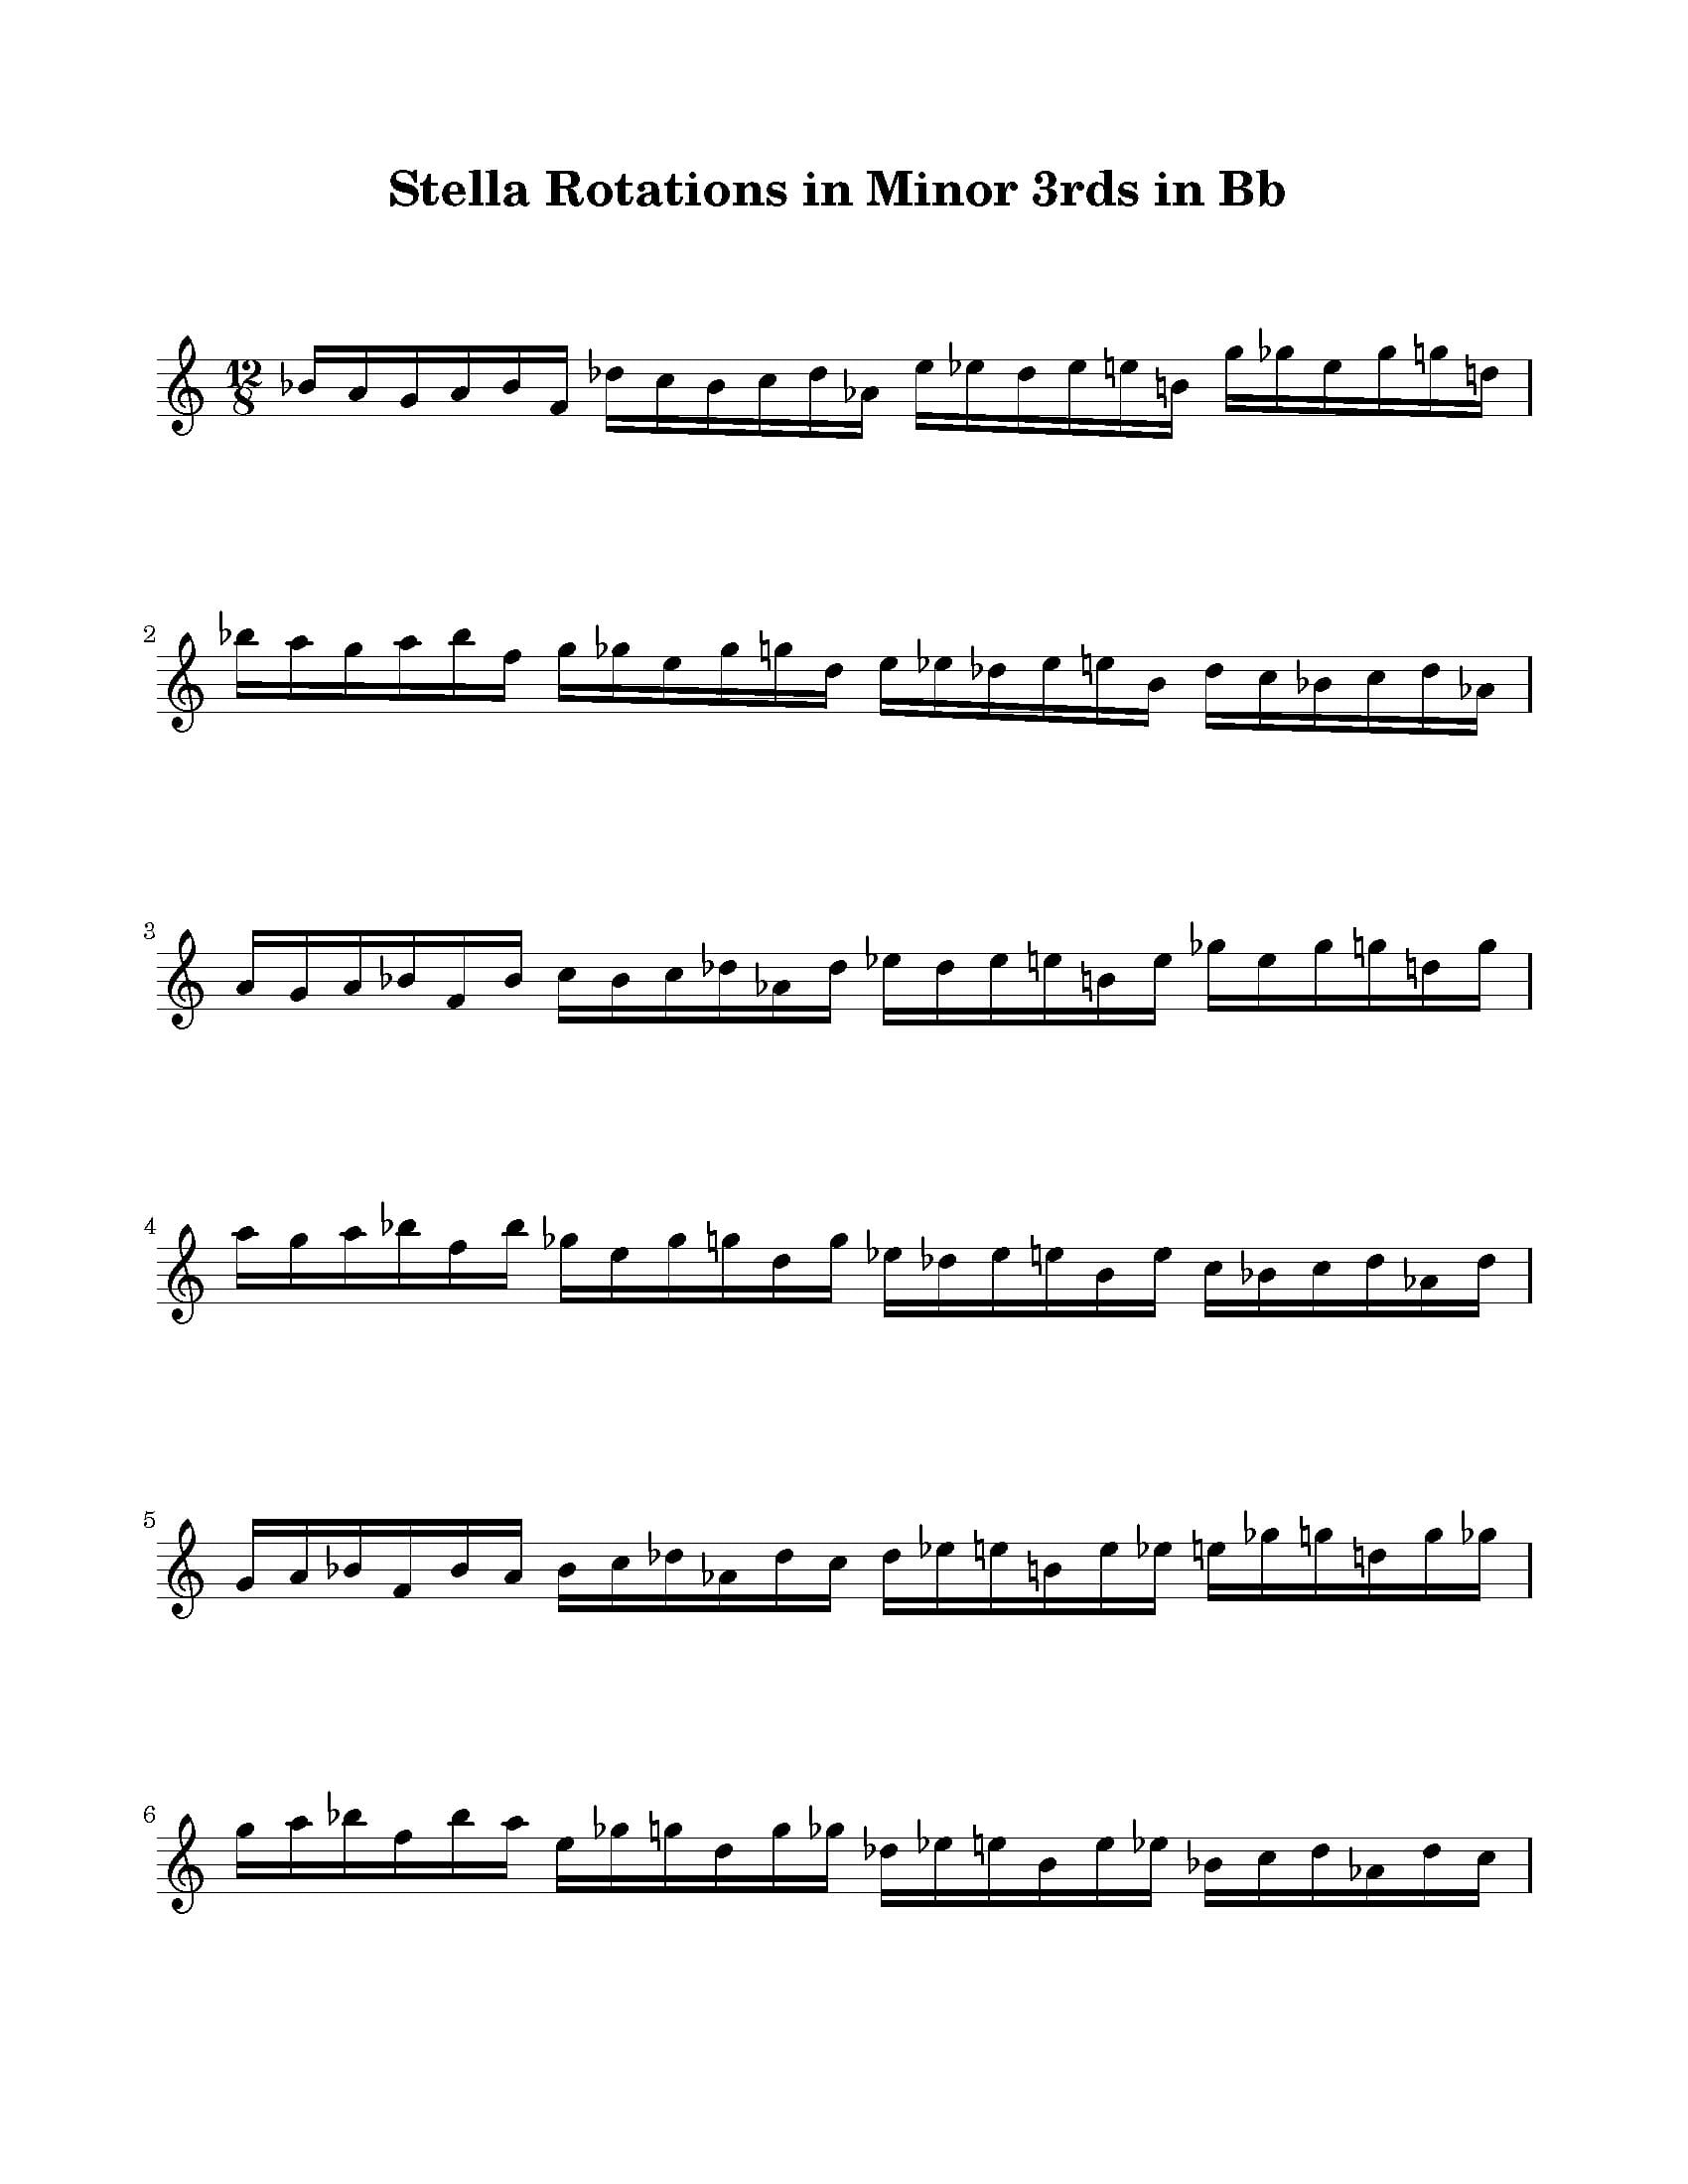 Playing-Off-The-Melody-Stella_Rotations_min3rds_Bb__Page_1